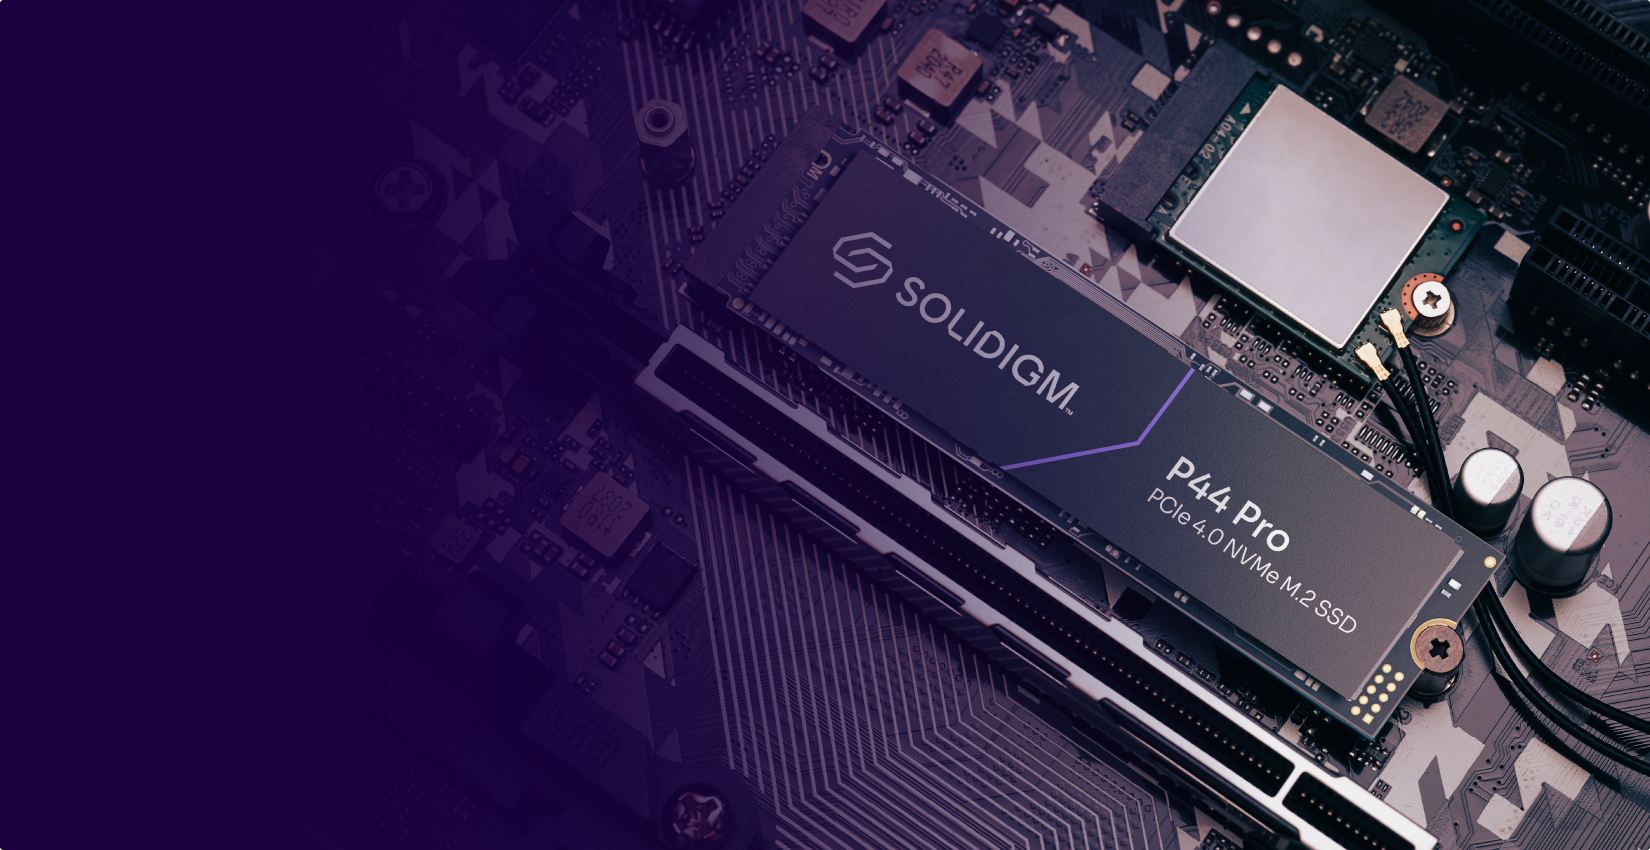 Solidigm P44 Pro 4.0 NVMe M.2 SSD used as gaming SSD, workstation SSD, or in other high performance SSD apps